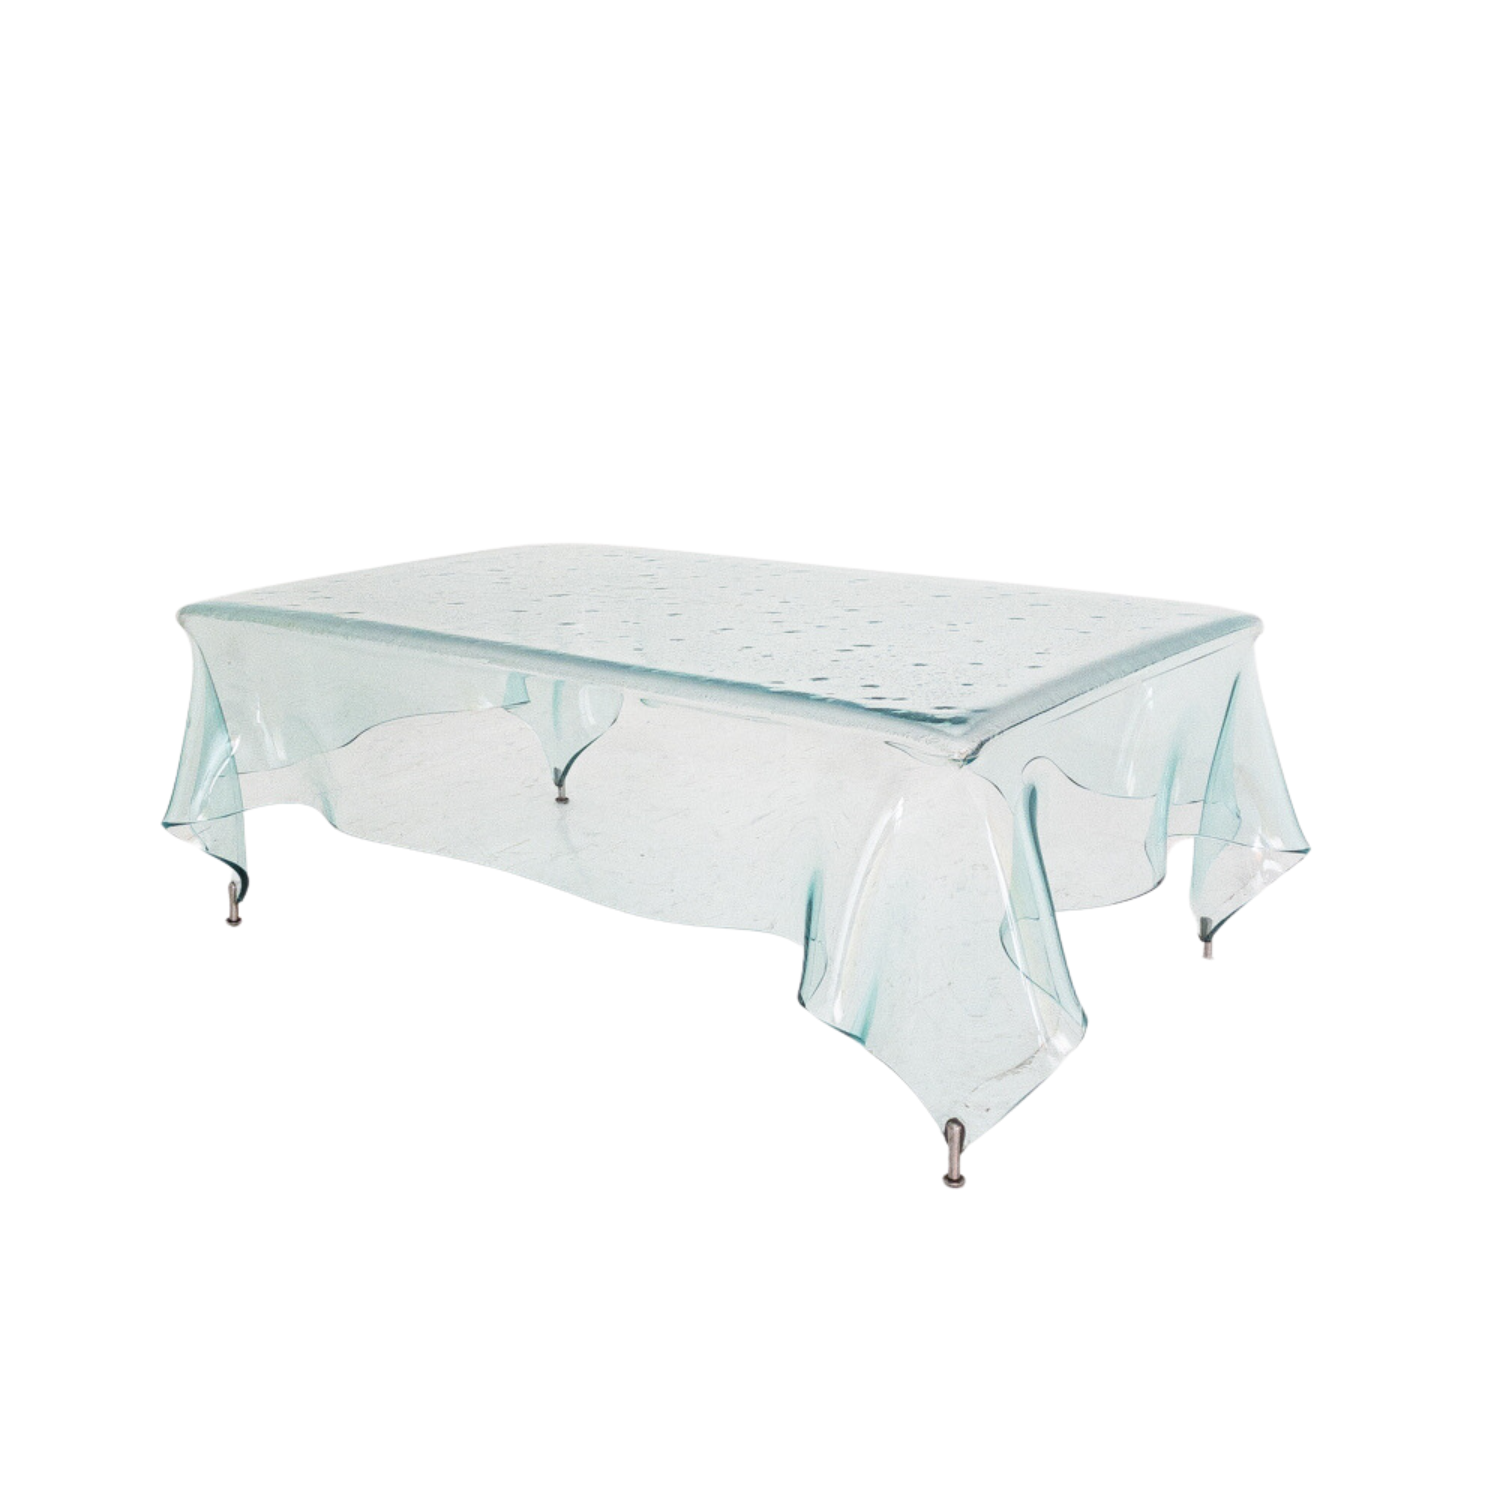 Handkerchief table in crystal with metal tips, Italy 80s